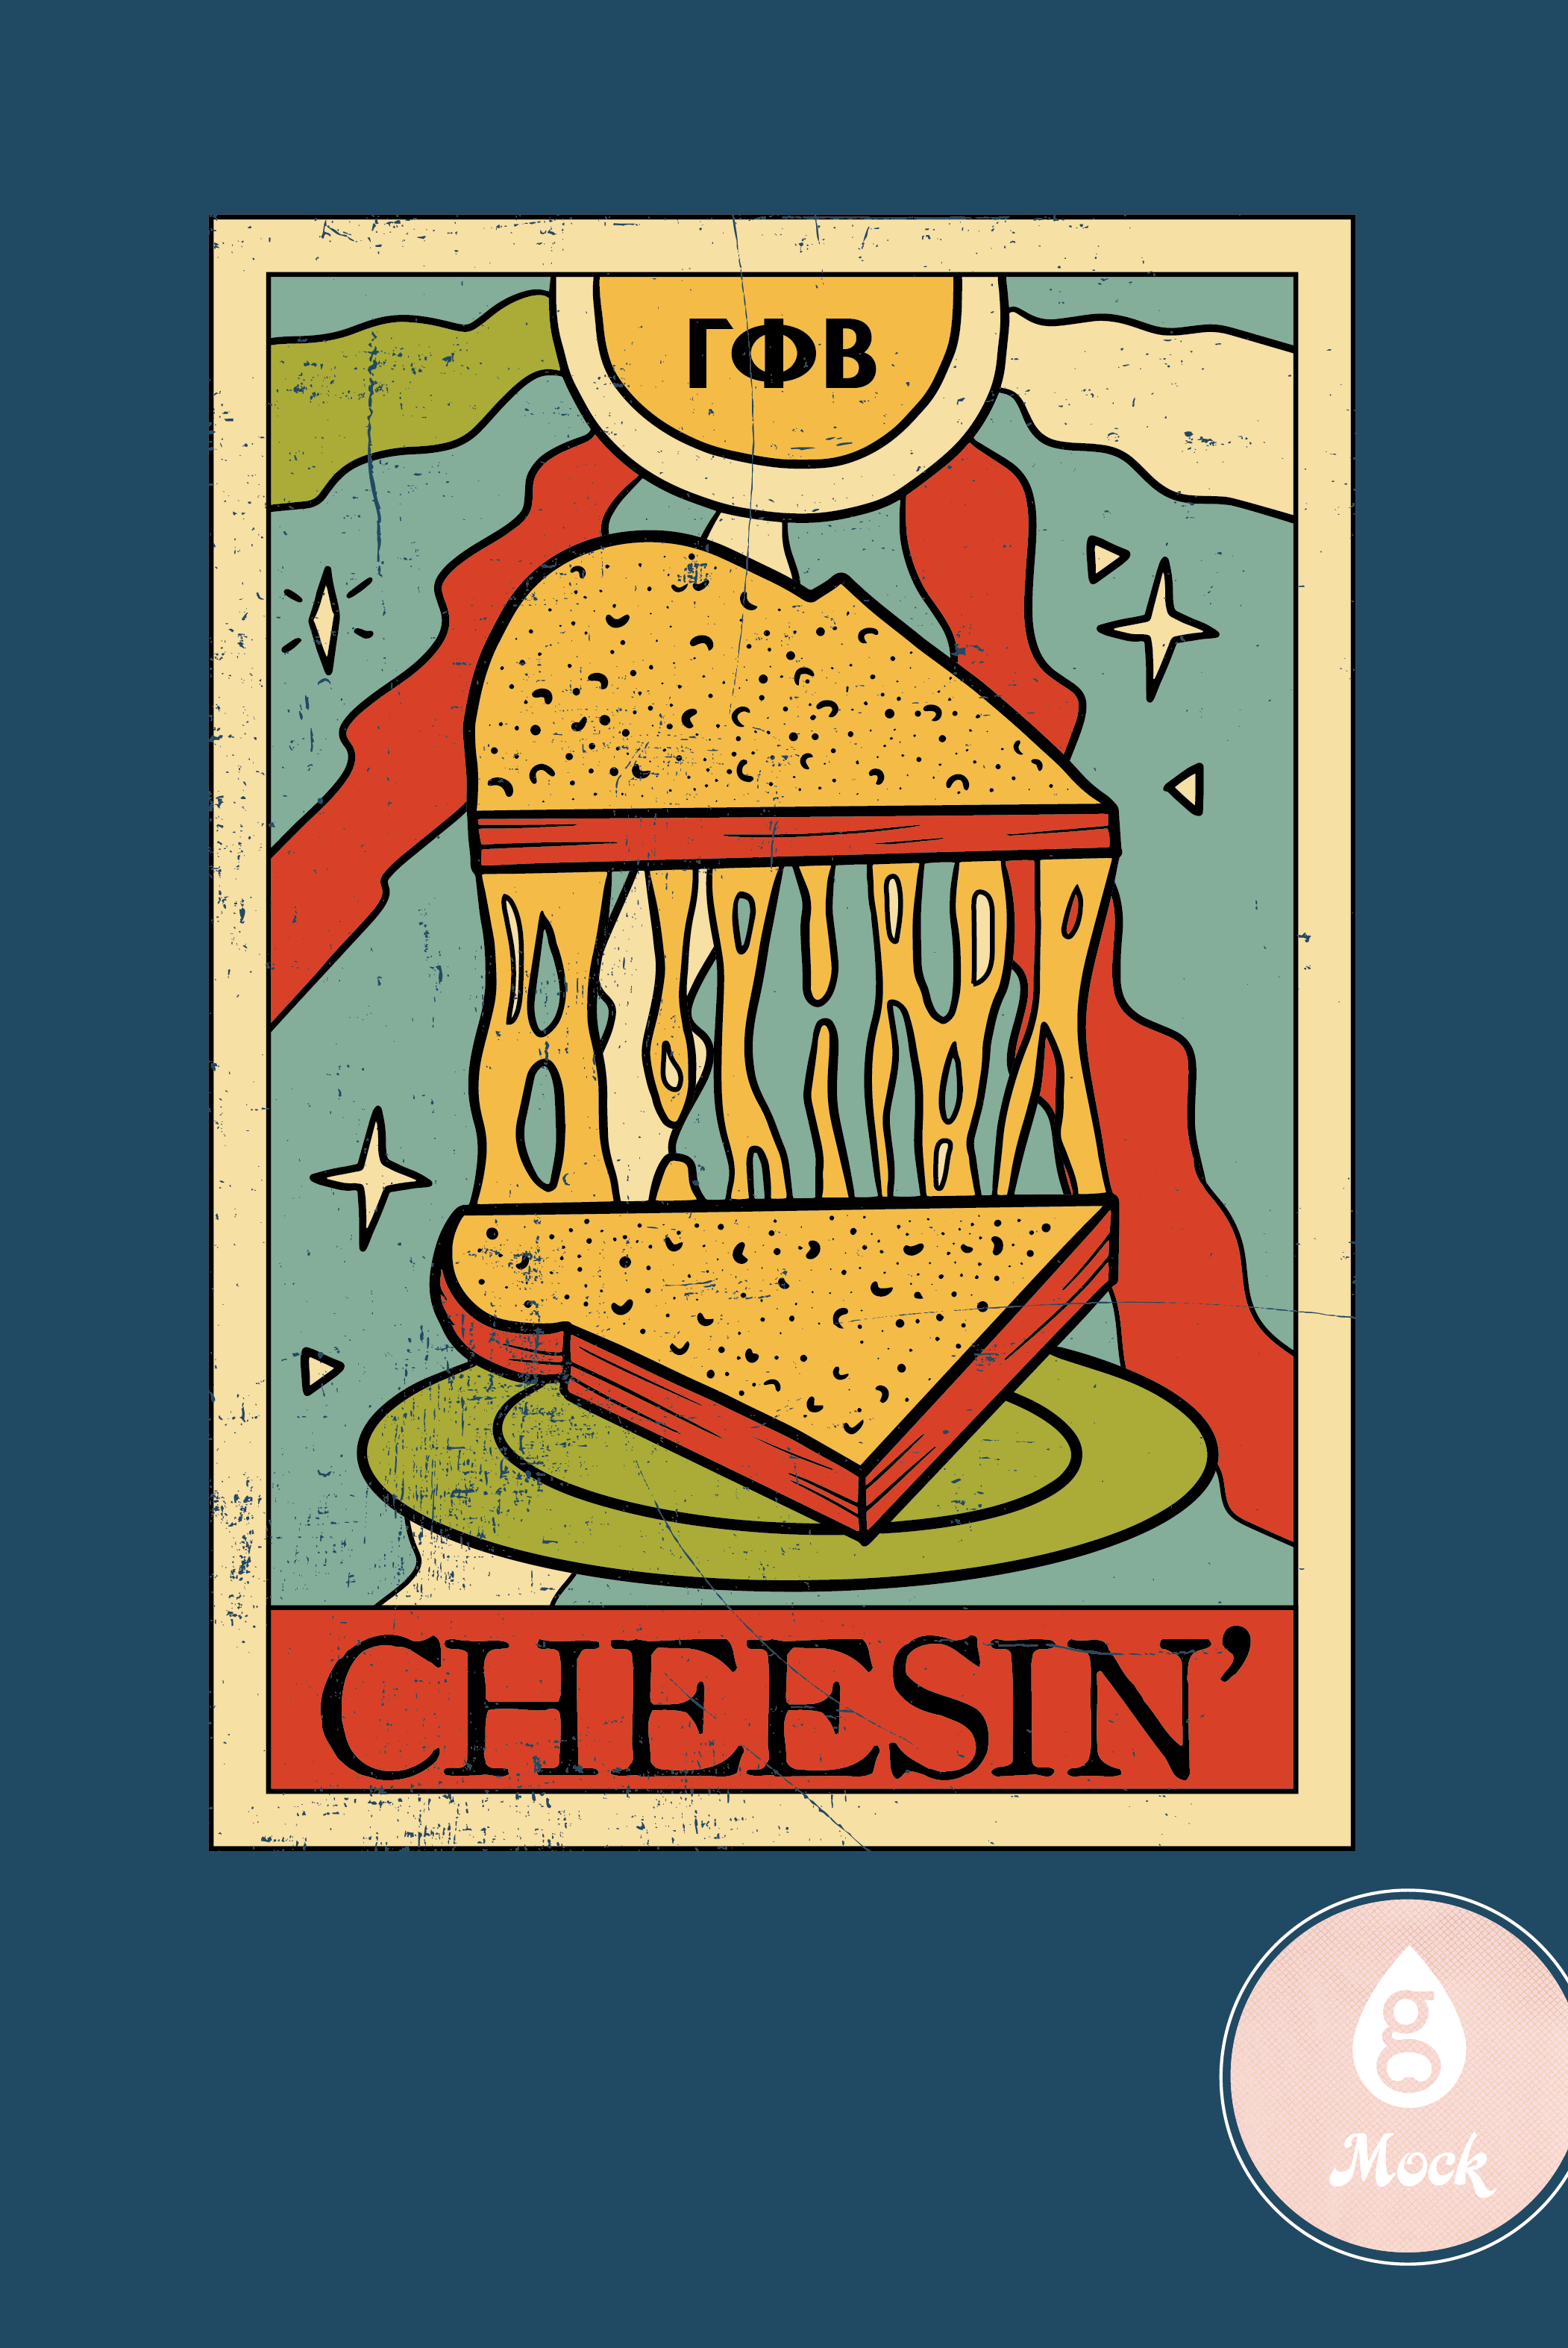 GPB_Philanthropy_GrilledCheese-01.png